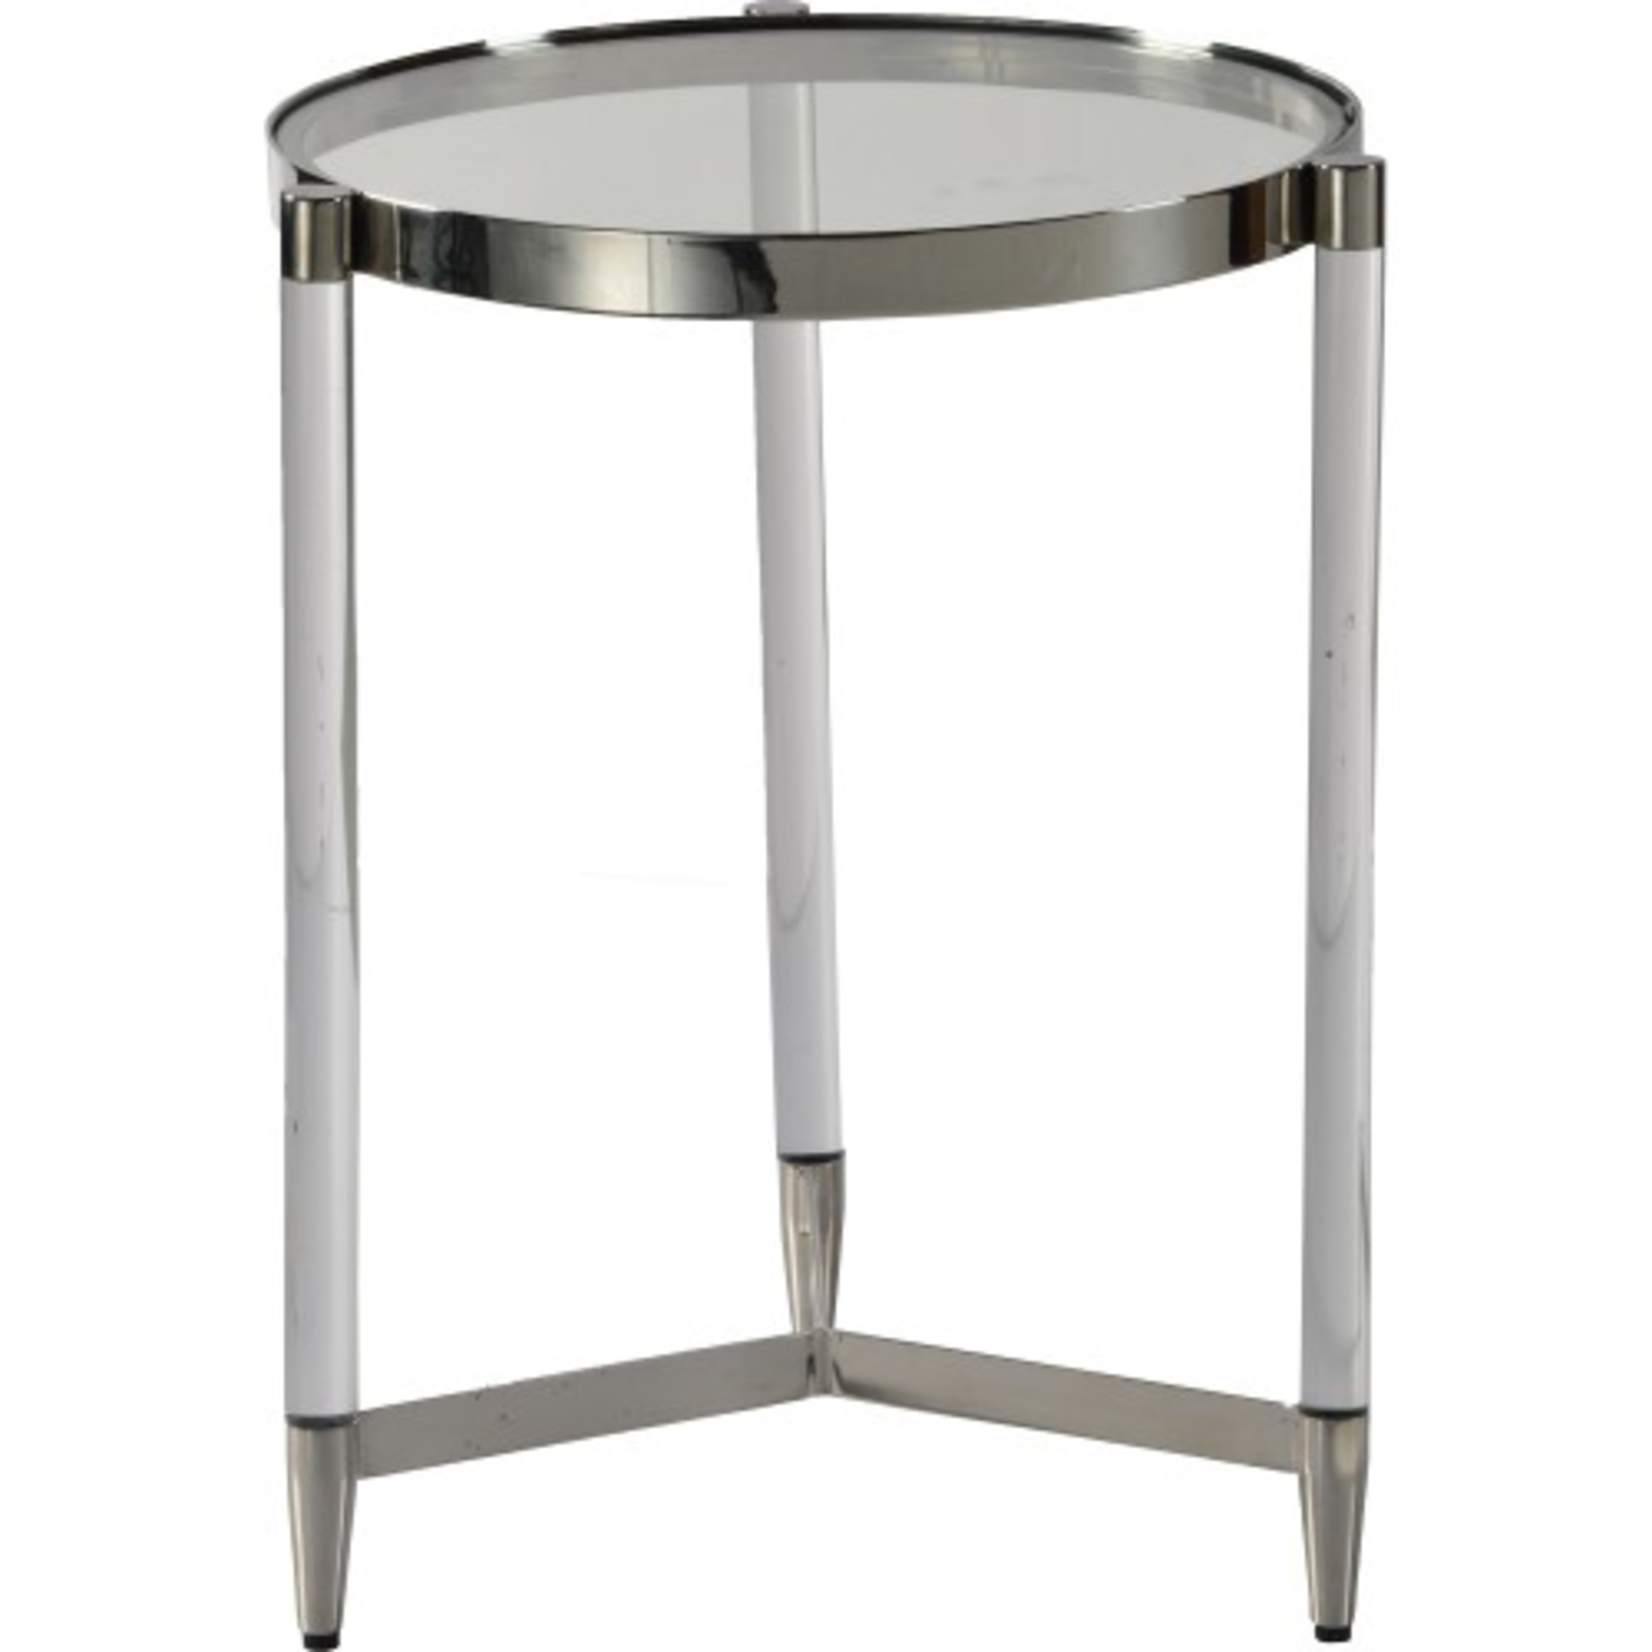 Shira  Stainless Steel - Acrylic - Glass Side Table, Chrome Finish